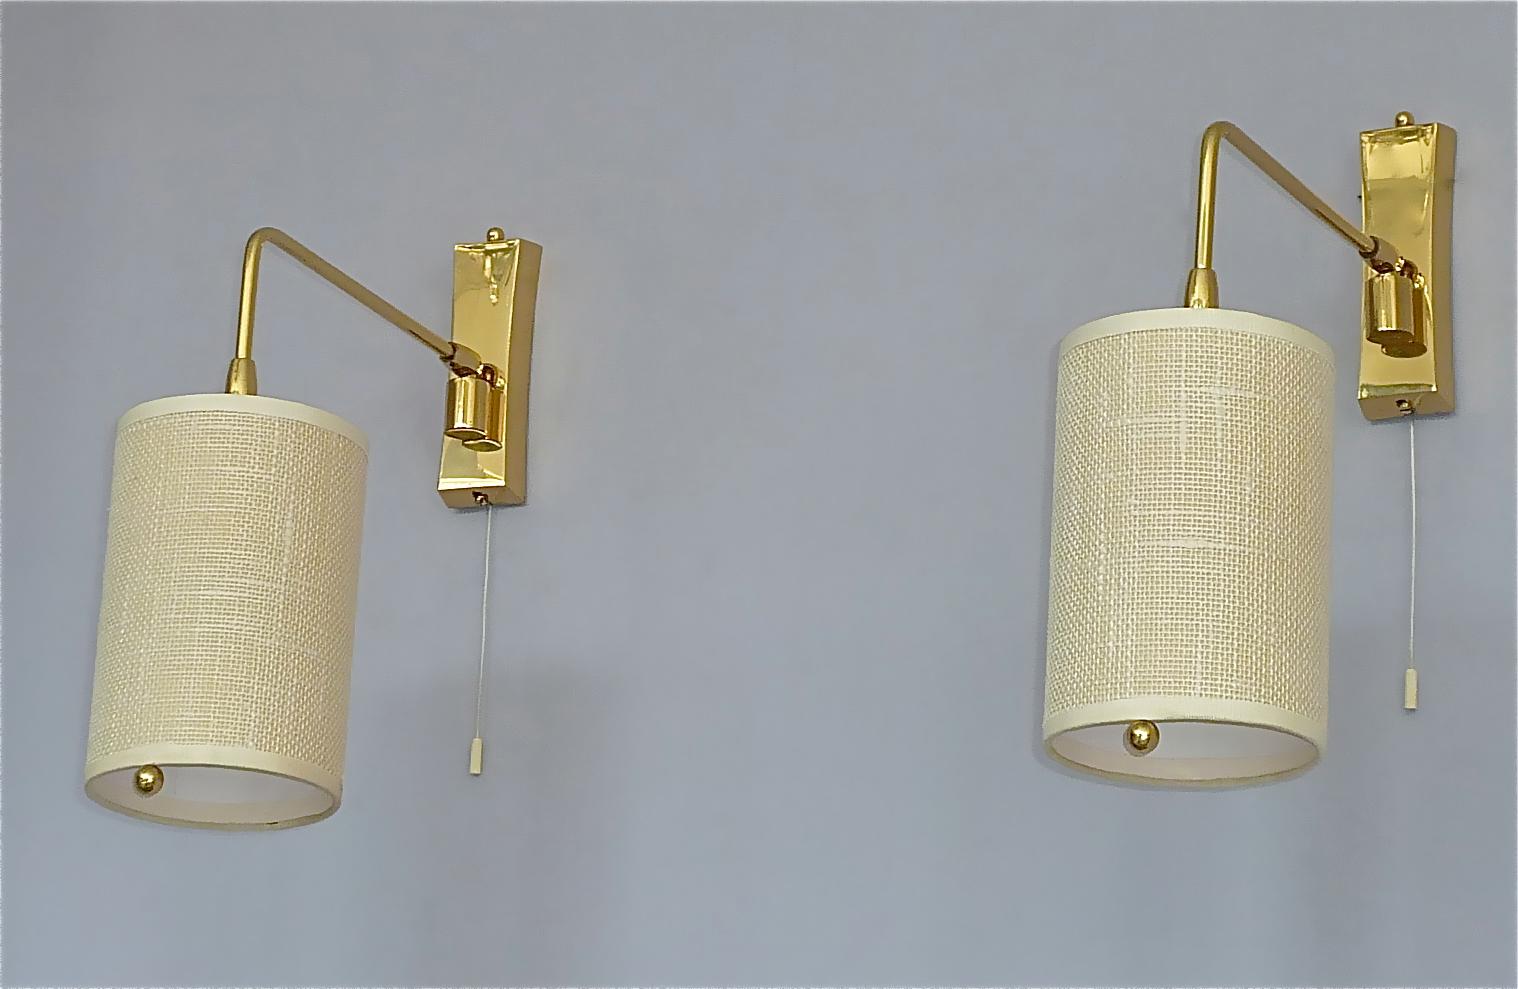 Gorgeous Scandinavian / Austrian pair of wall lamps by Kalmar Austria attribution and very in the style of Paavo Tynell around 1950s. The multifunctional height and side adjustable sconces with string switch have a gilt brass base with movable arm